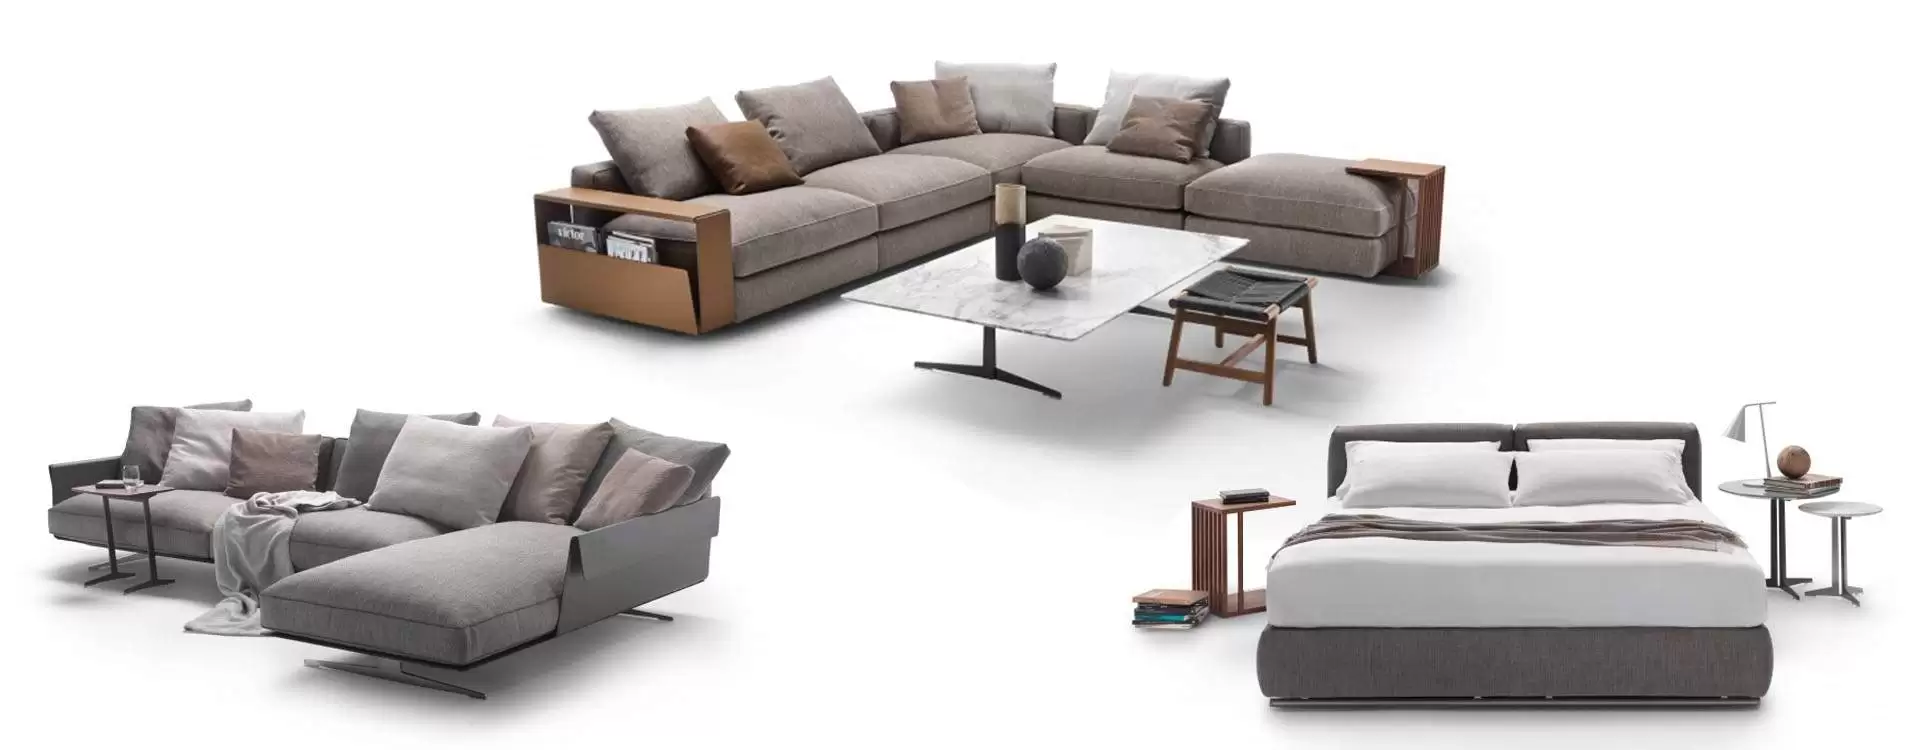 Discover the new Flexform 2021 collection